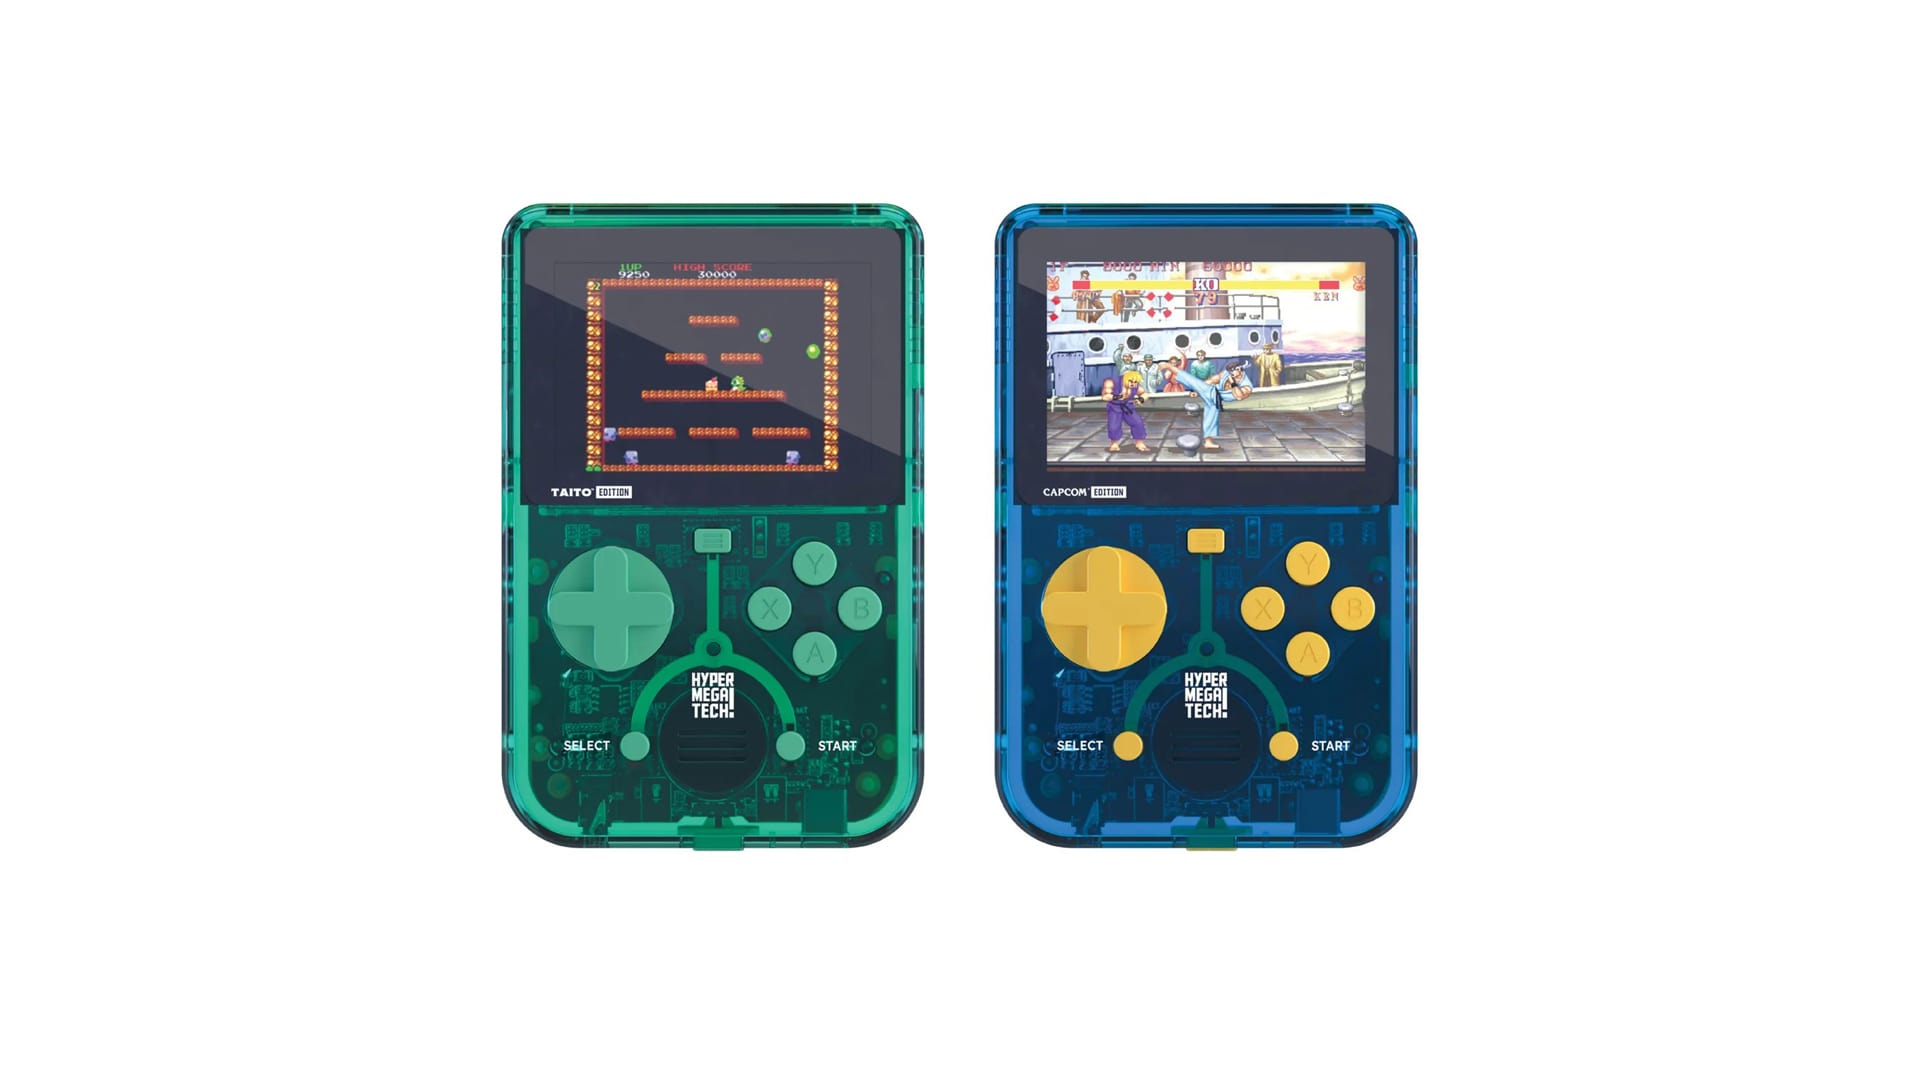 Super Pocket Console, a portable gaming device with classic game titles